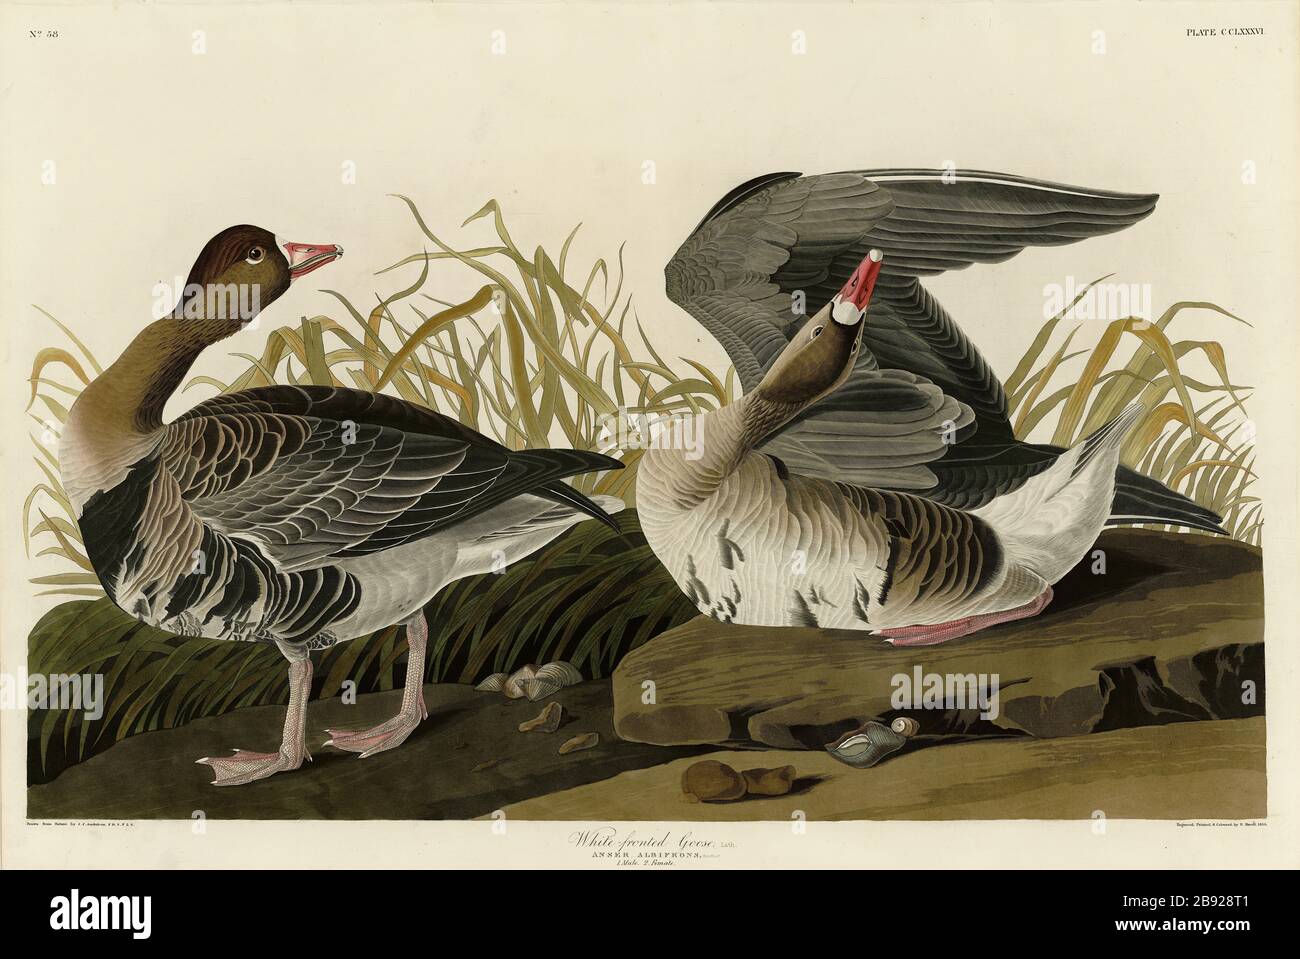 Plate 286 White-fronted Goose, from The Birds of America folio (1827–1839) by John James Audubon - Very high resolution and quality edited image Stock Photo